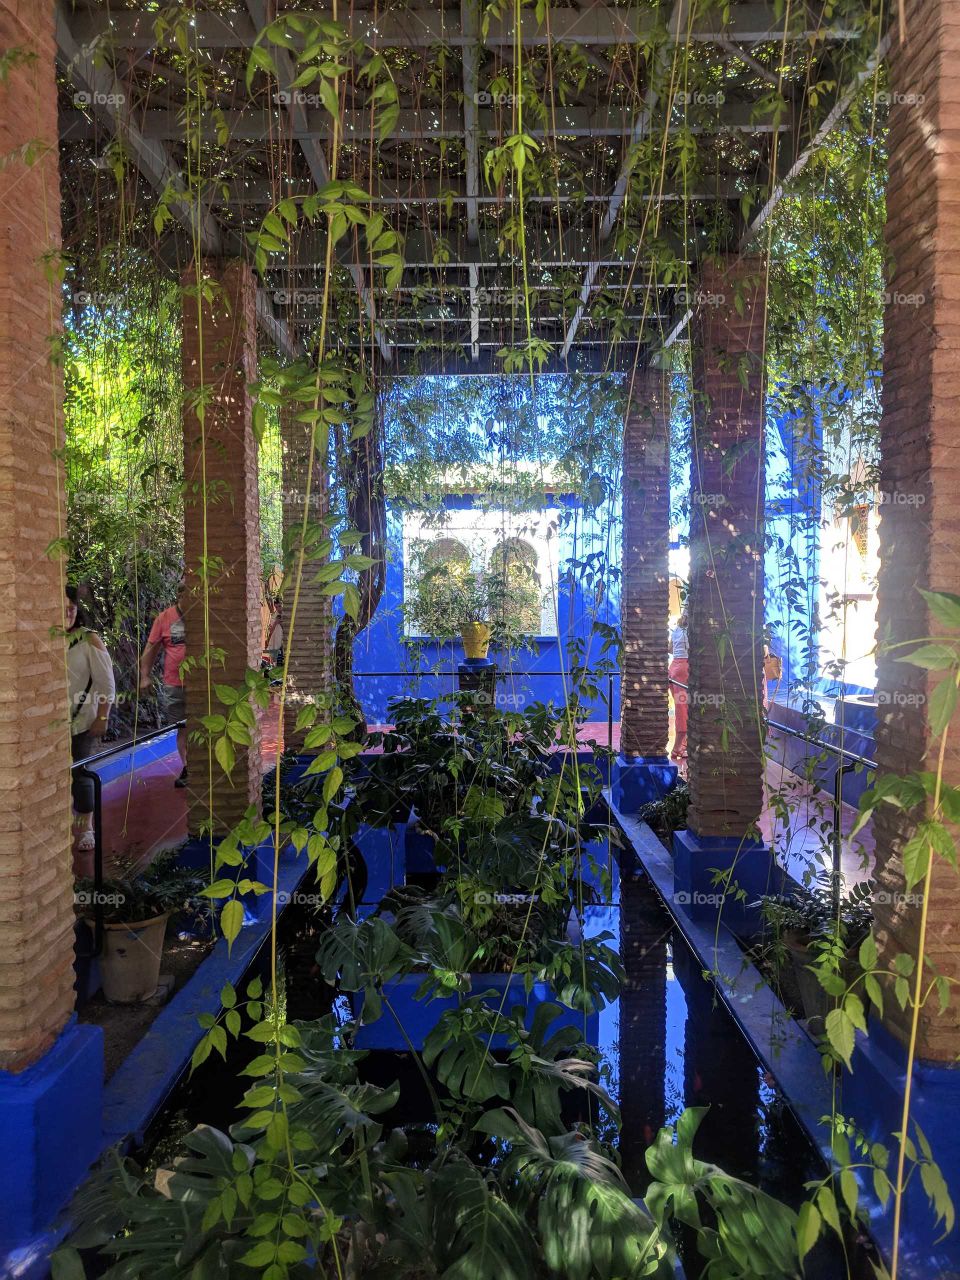 Indoor Rainforest with Hanging Green Plants and Water at the Jardin Majorelle (Garden) in Marrakech in Morocco